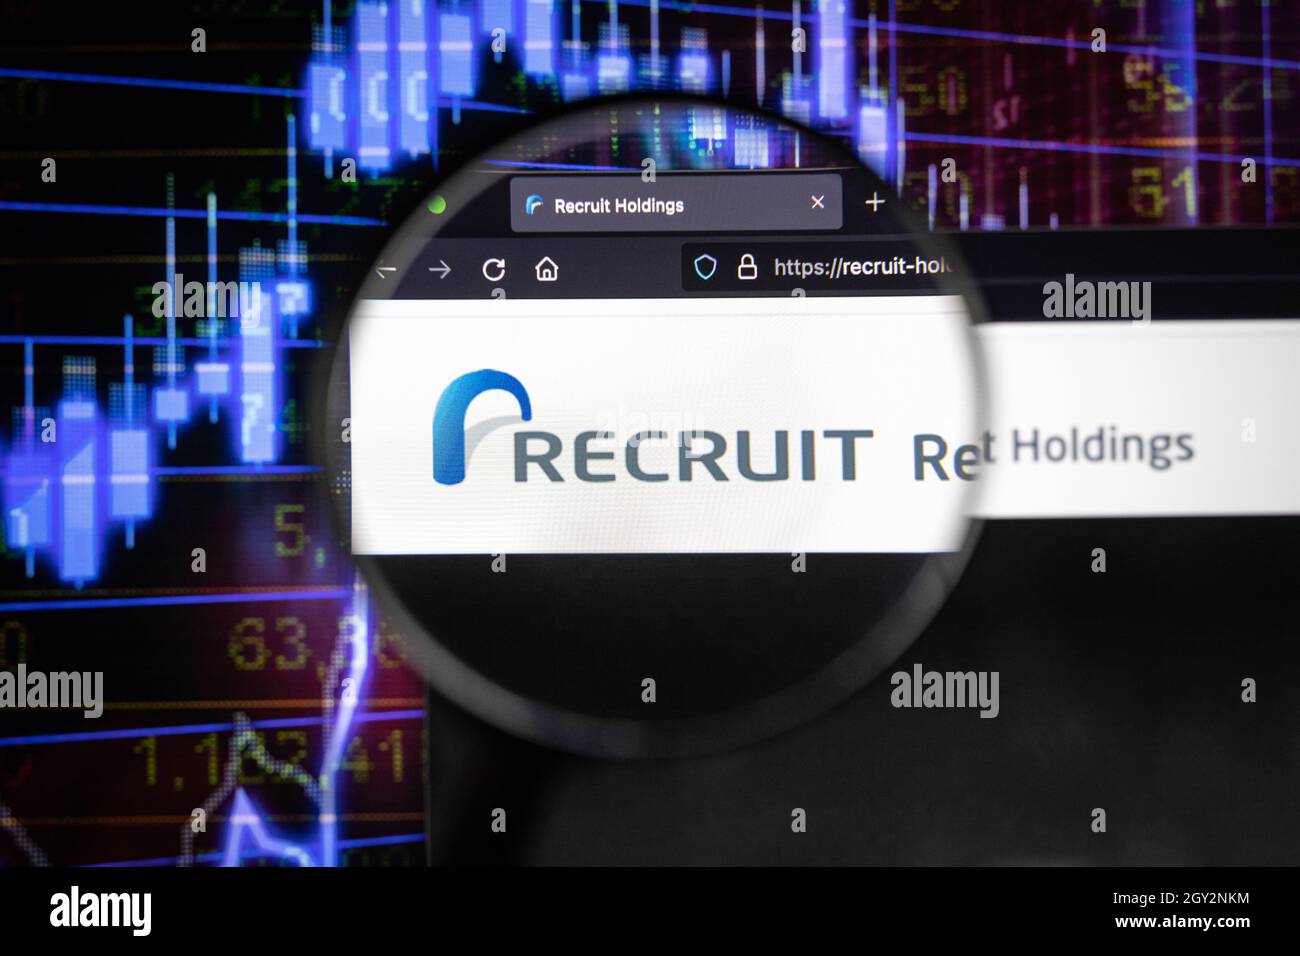 Recruit company logo on a website with blurry stock market developments in the background, seen on a computer screen through a magnifying glass Stock Photo